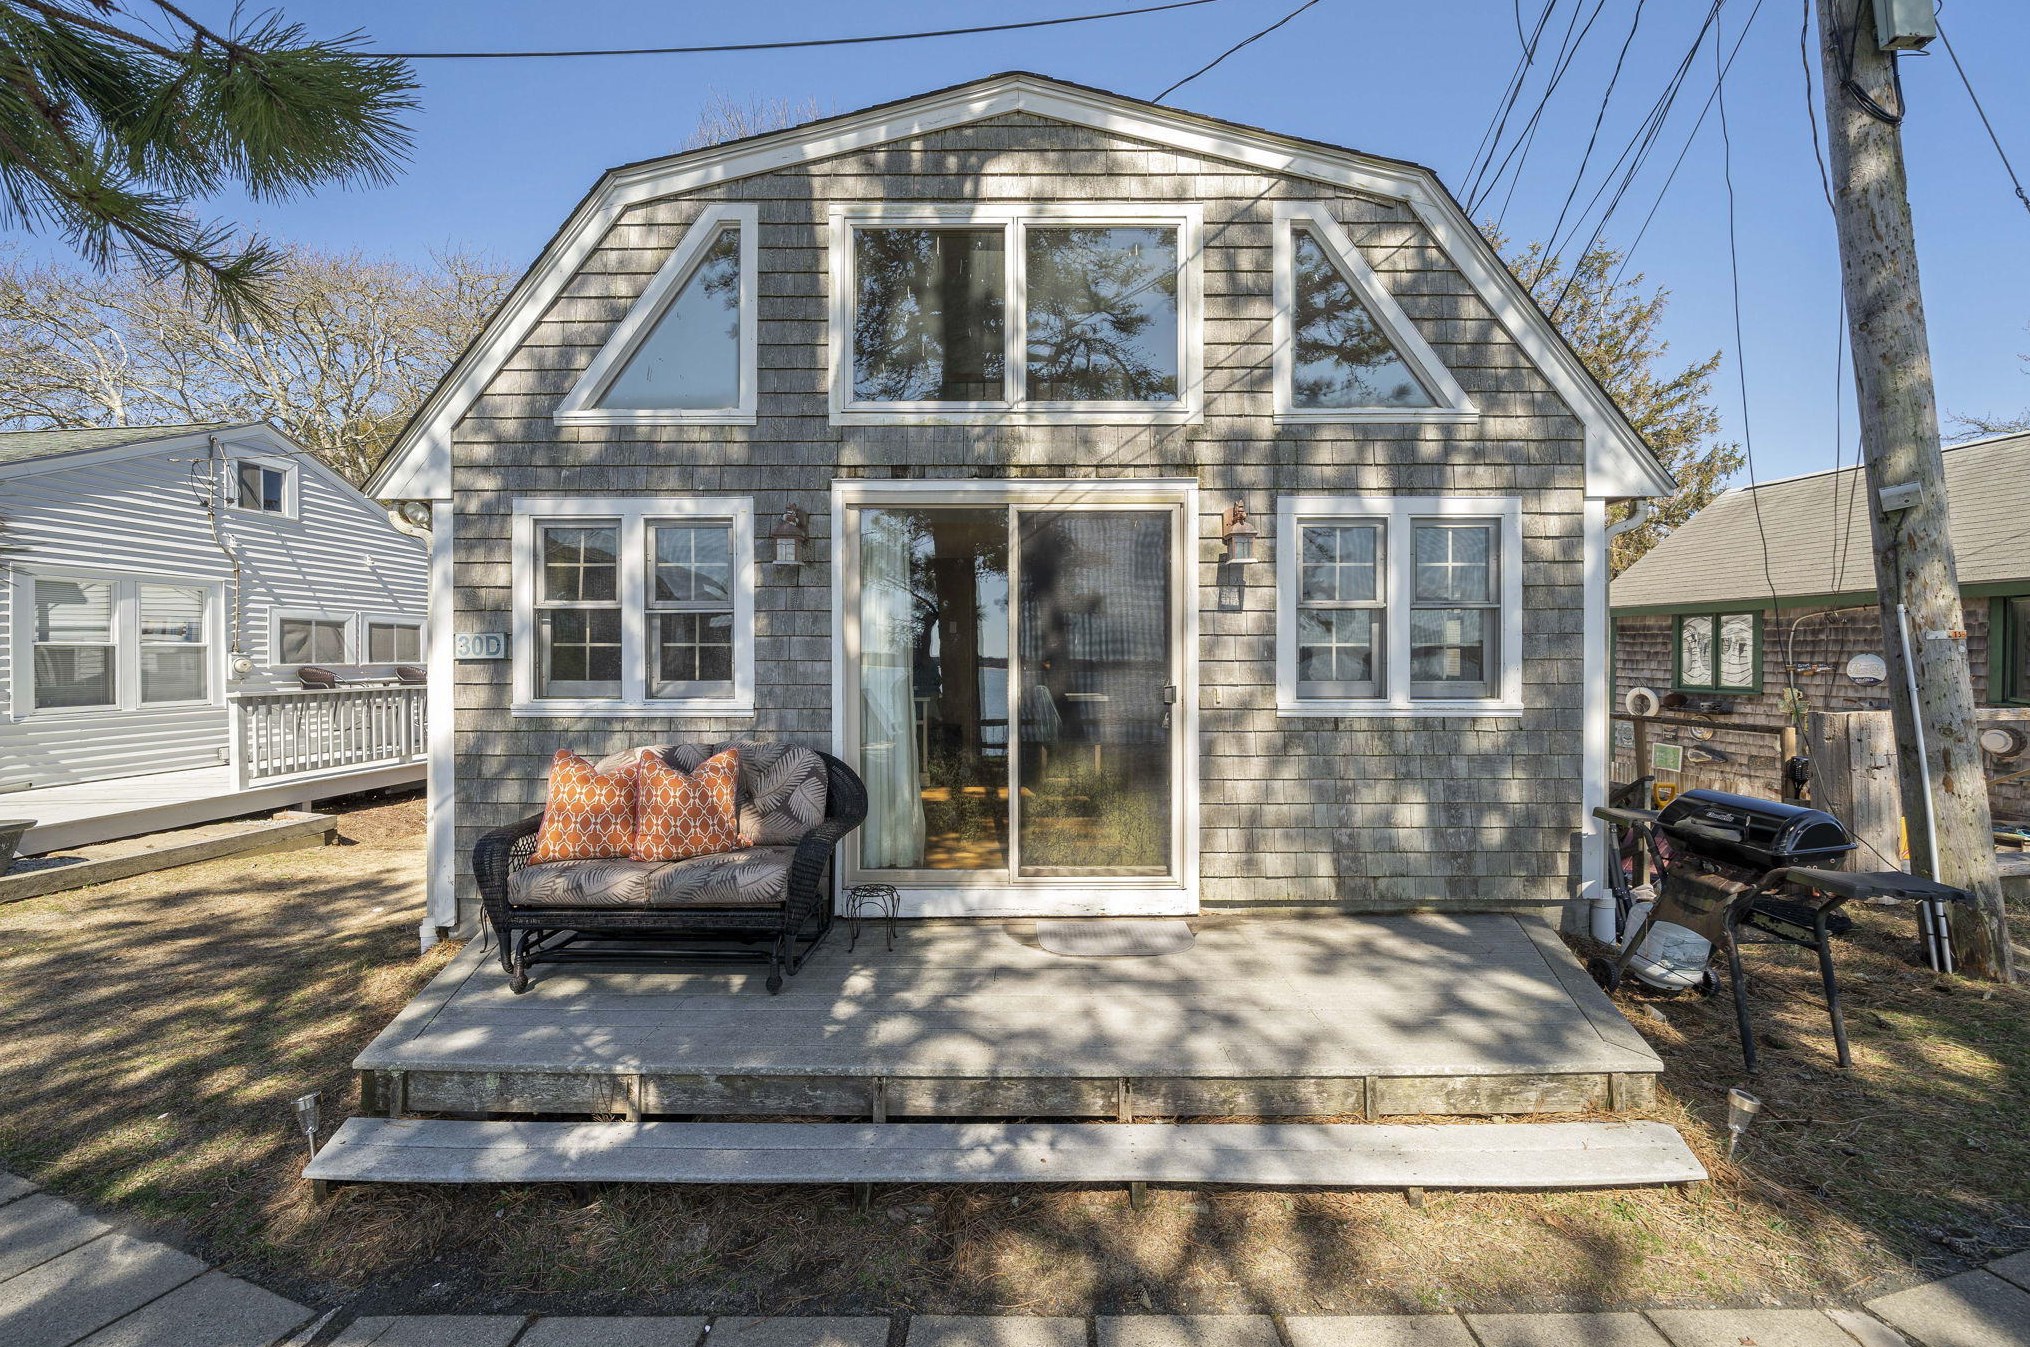 749 Head Of The Bay Rd, Bourne, MA 02532